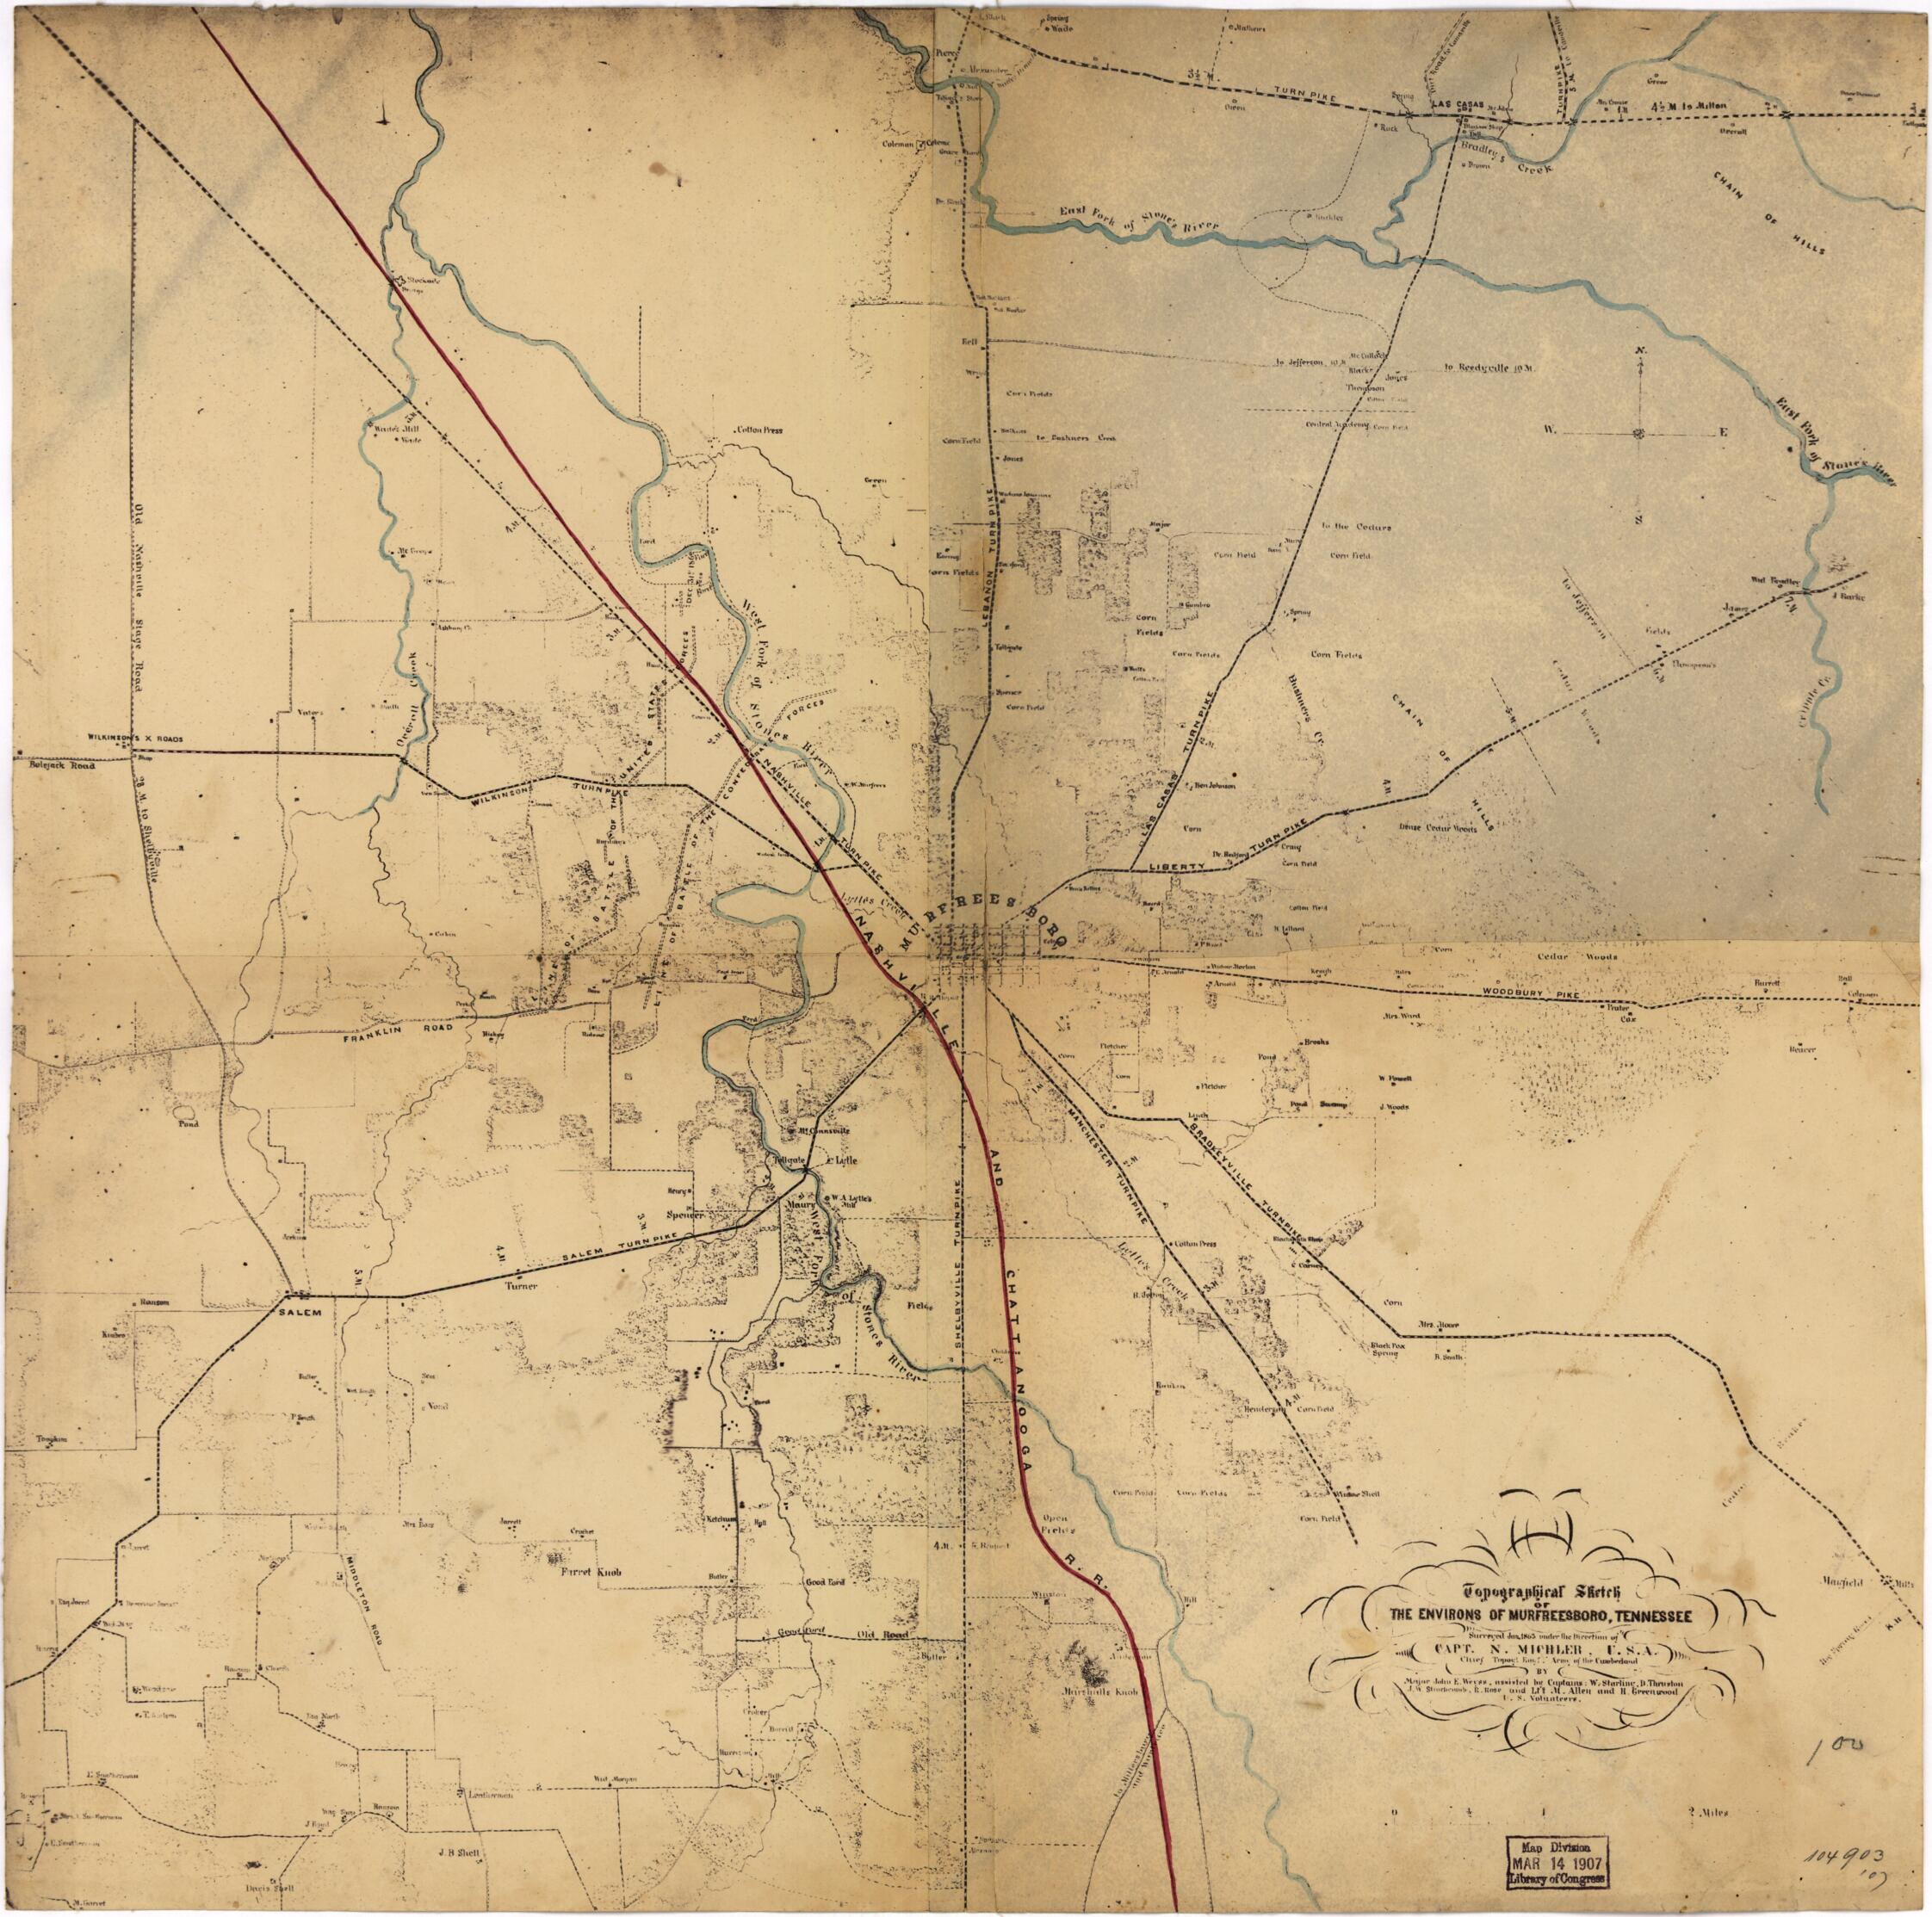 This old map of Topographical Sketch of the Environs of Murfreesboro, Tennessee. Surveyed Jan. from 1863 Under the Direction of Capt. N. Michler, U.S.A., Chief Topl. Engr., Army of the Cumberland, by Maj. John E. Weyss, Assisted by Captains: W. Starling,